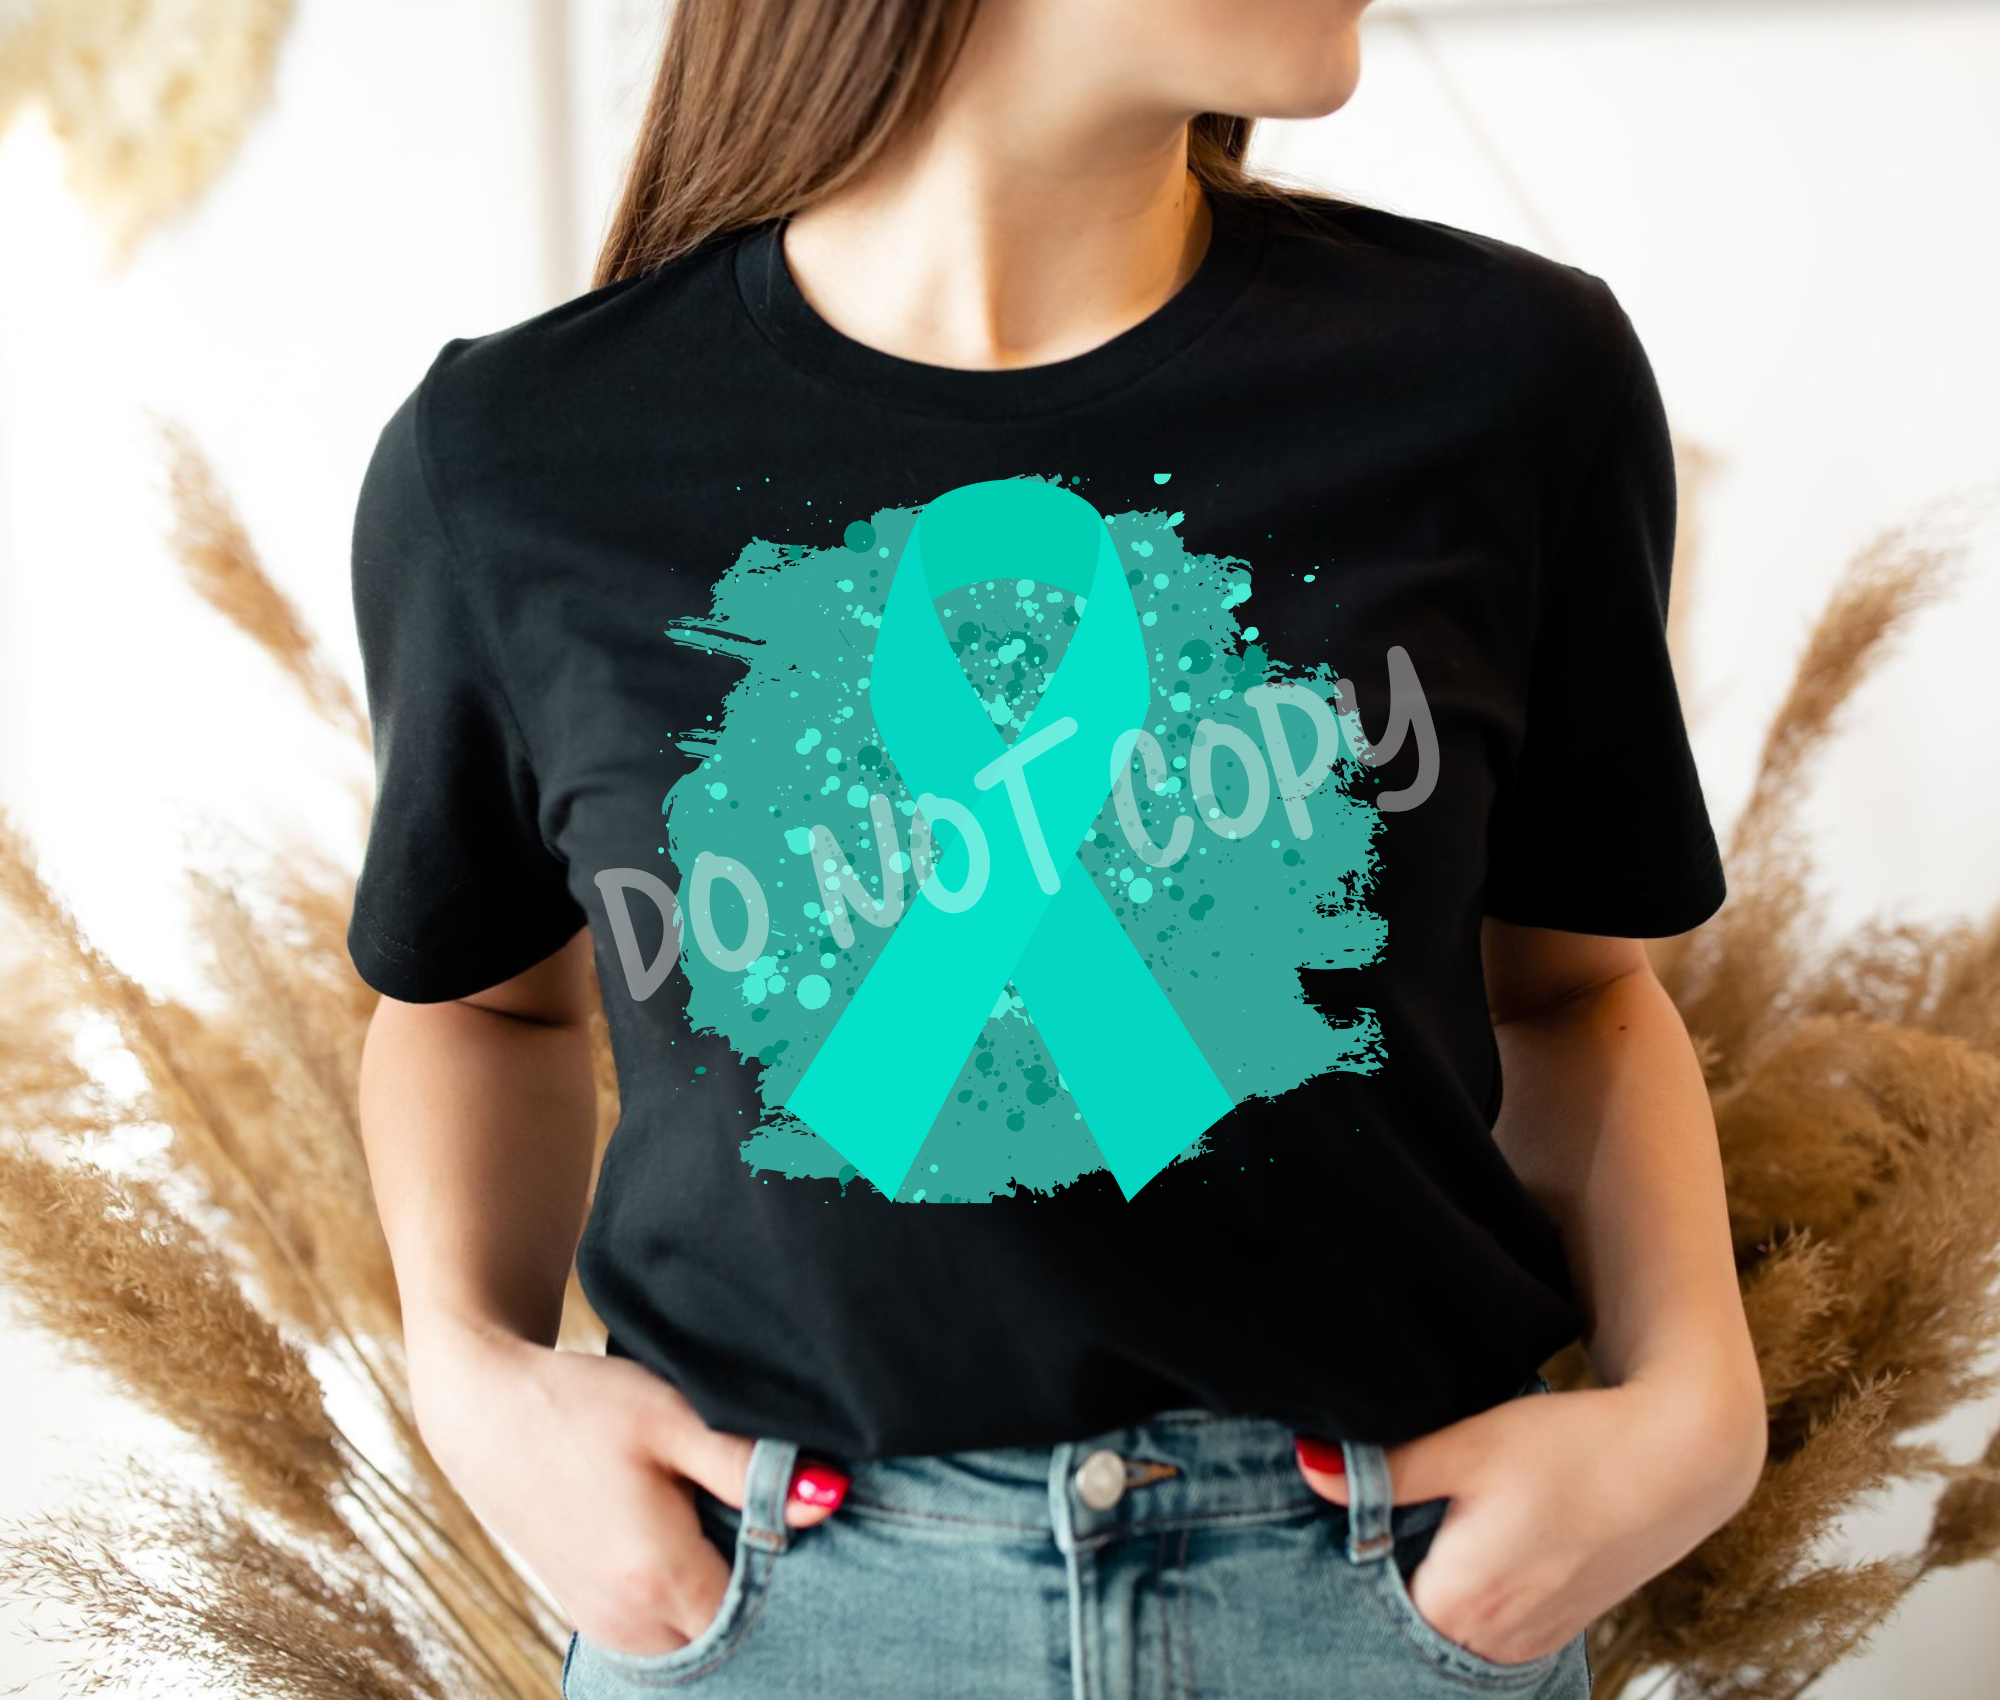 TEAL RIBBON -AWARENESS FUNDRAISER -UNISEX TEE ADULTS/KIDS PREORDER CLOSING 7/28 ETA END OF AUG/EARLY SEP